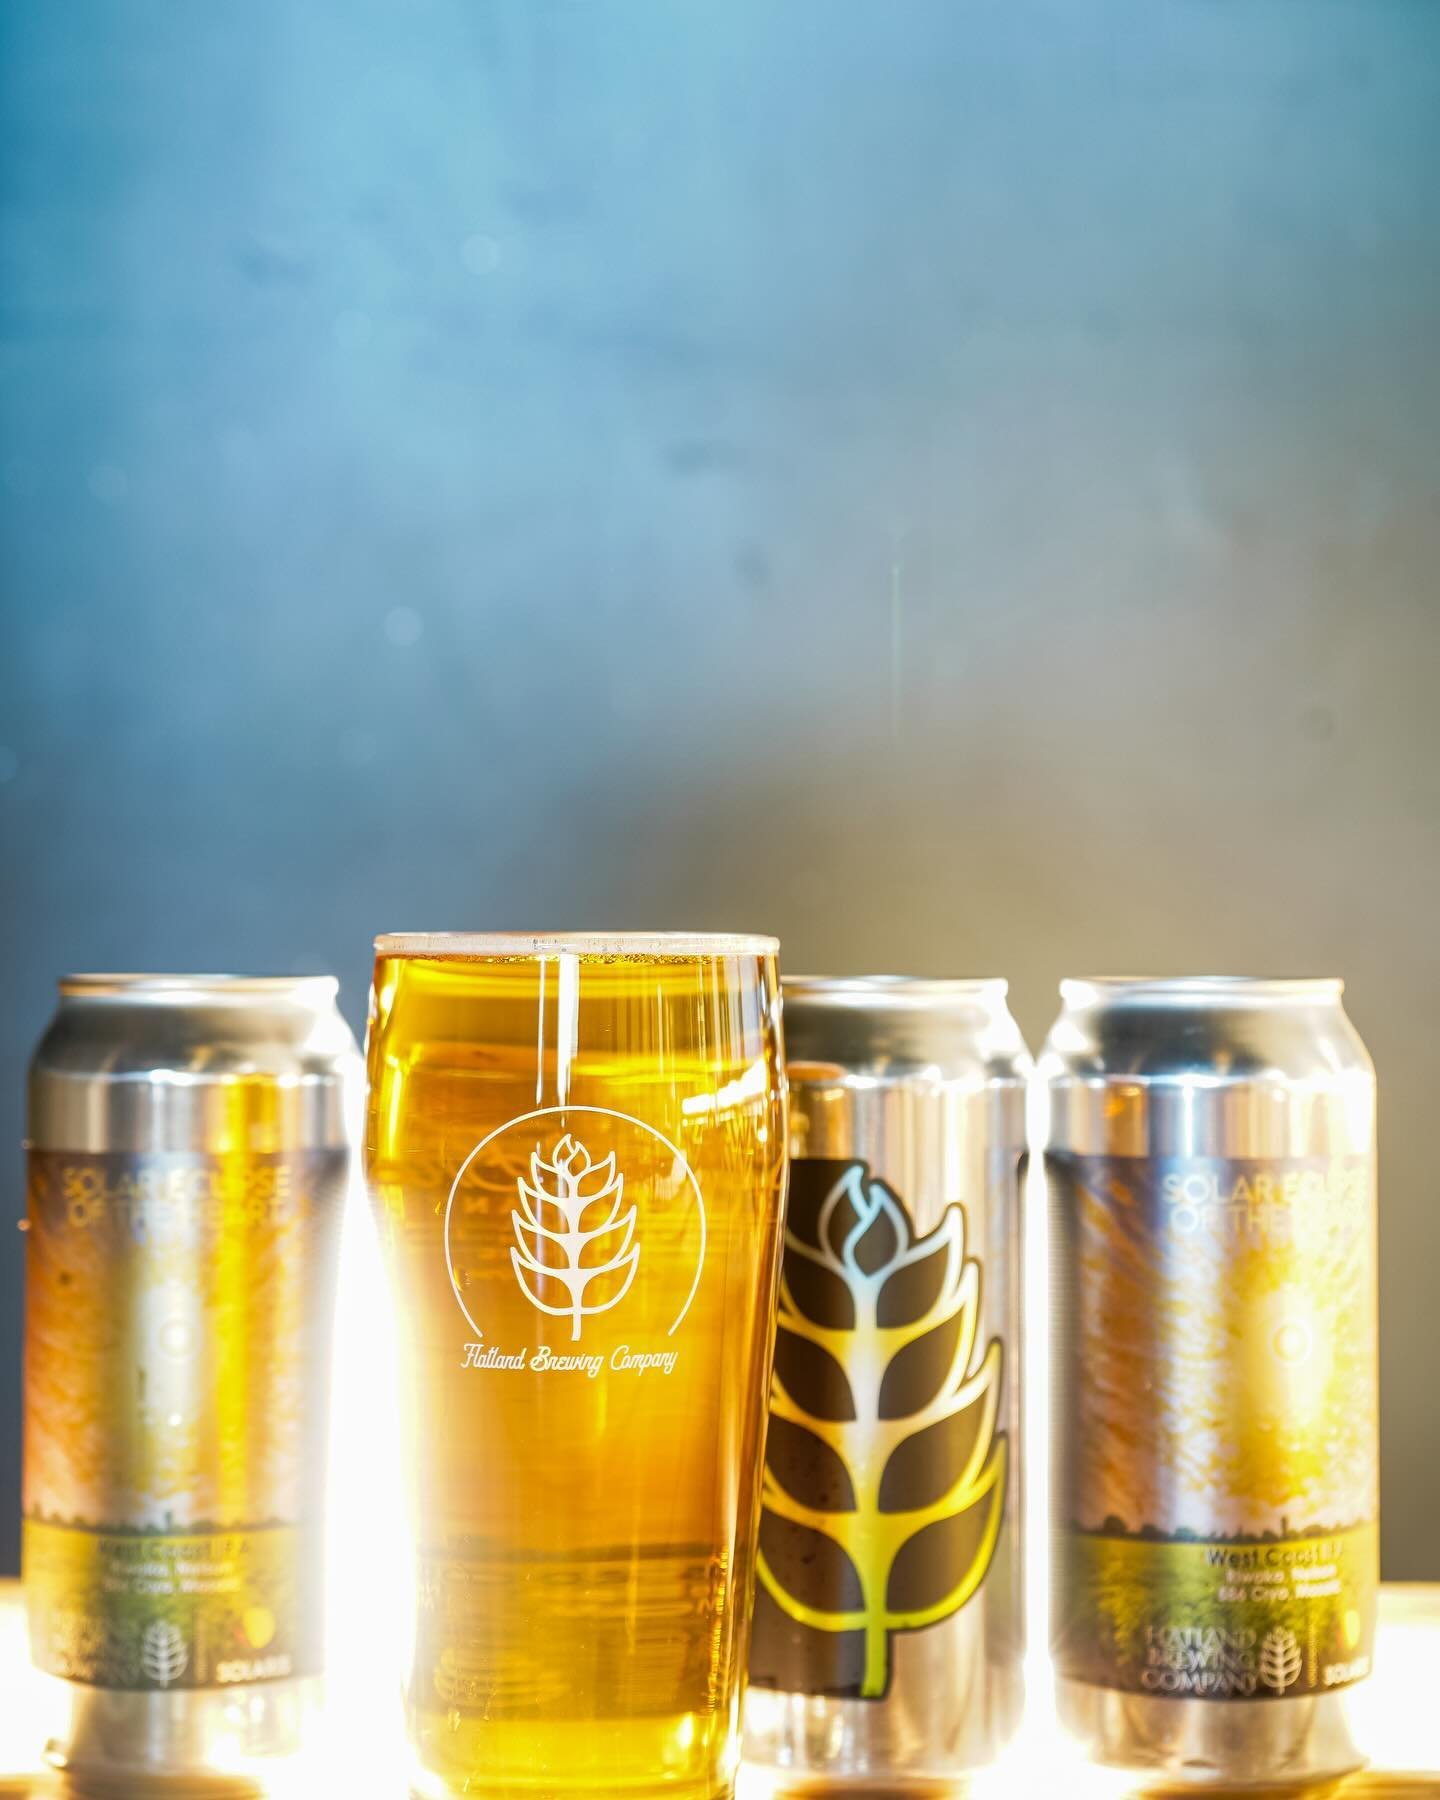 &ldquo;Solar Eclipse Of The Heart&rdquo;. West Coast IPA with Riwaka, Nelson, HBC 586 Cryo &amp; Mosaic. Created with our pals @solarisbeer, each sip will transport you to moments of the sun&rsquo;s pure radiance. Cans &amp; draft available now! 🙌🍻